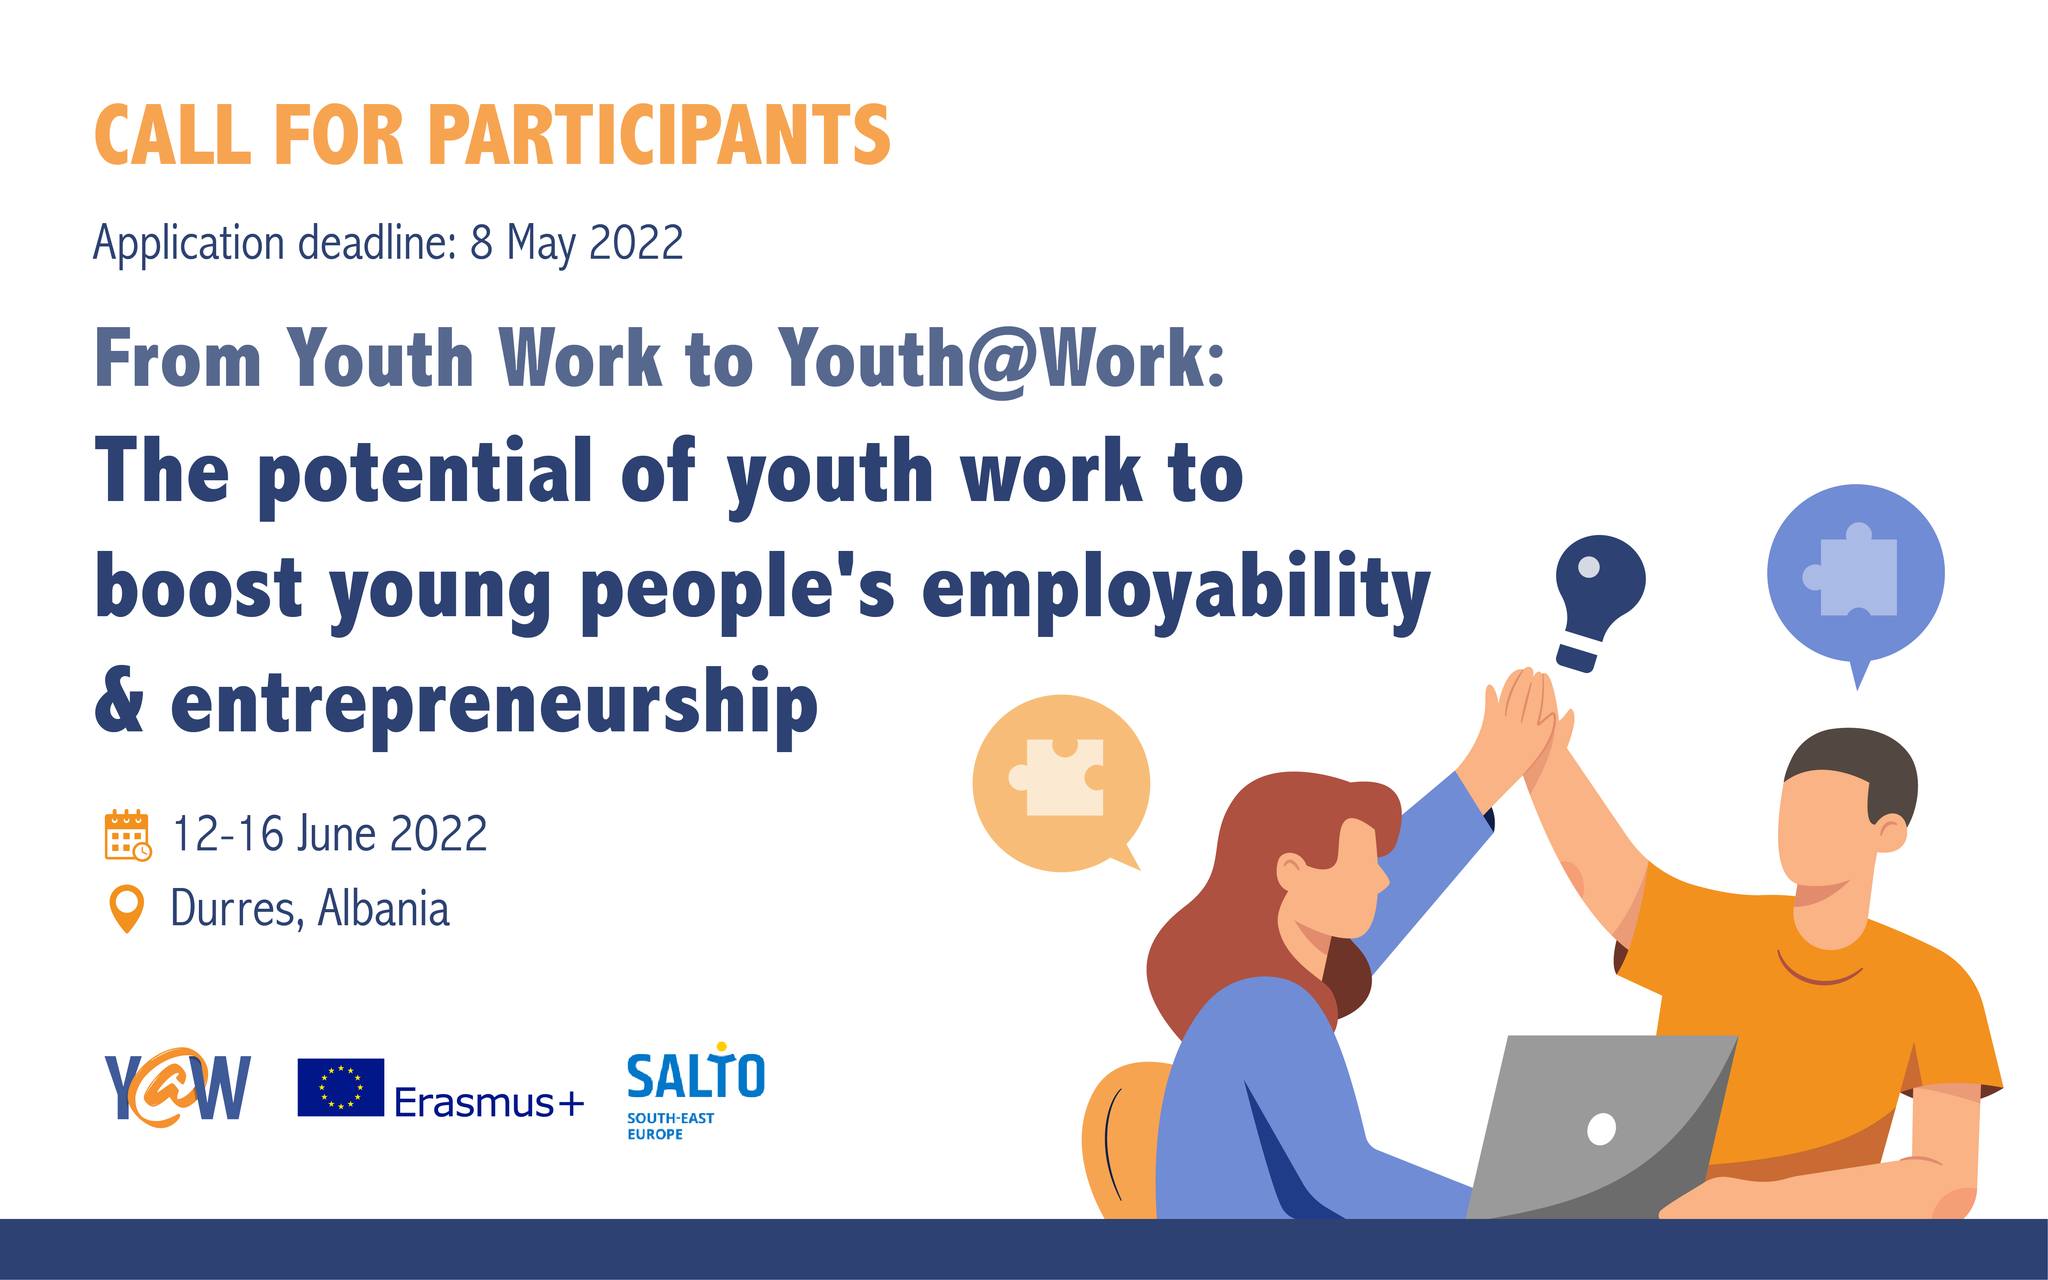 From youth work to Youth@Work: The potential of youth work to boost young people’s employability and entrepreneurship